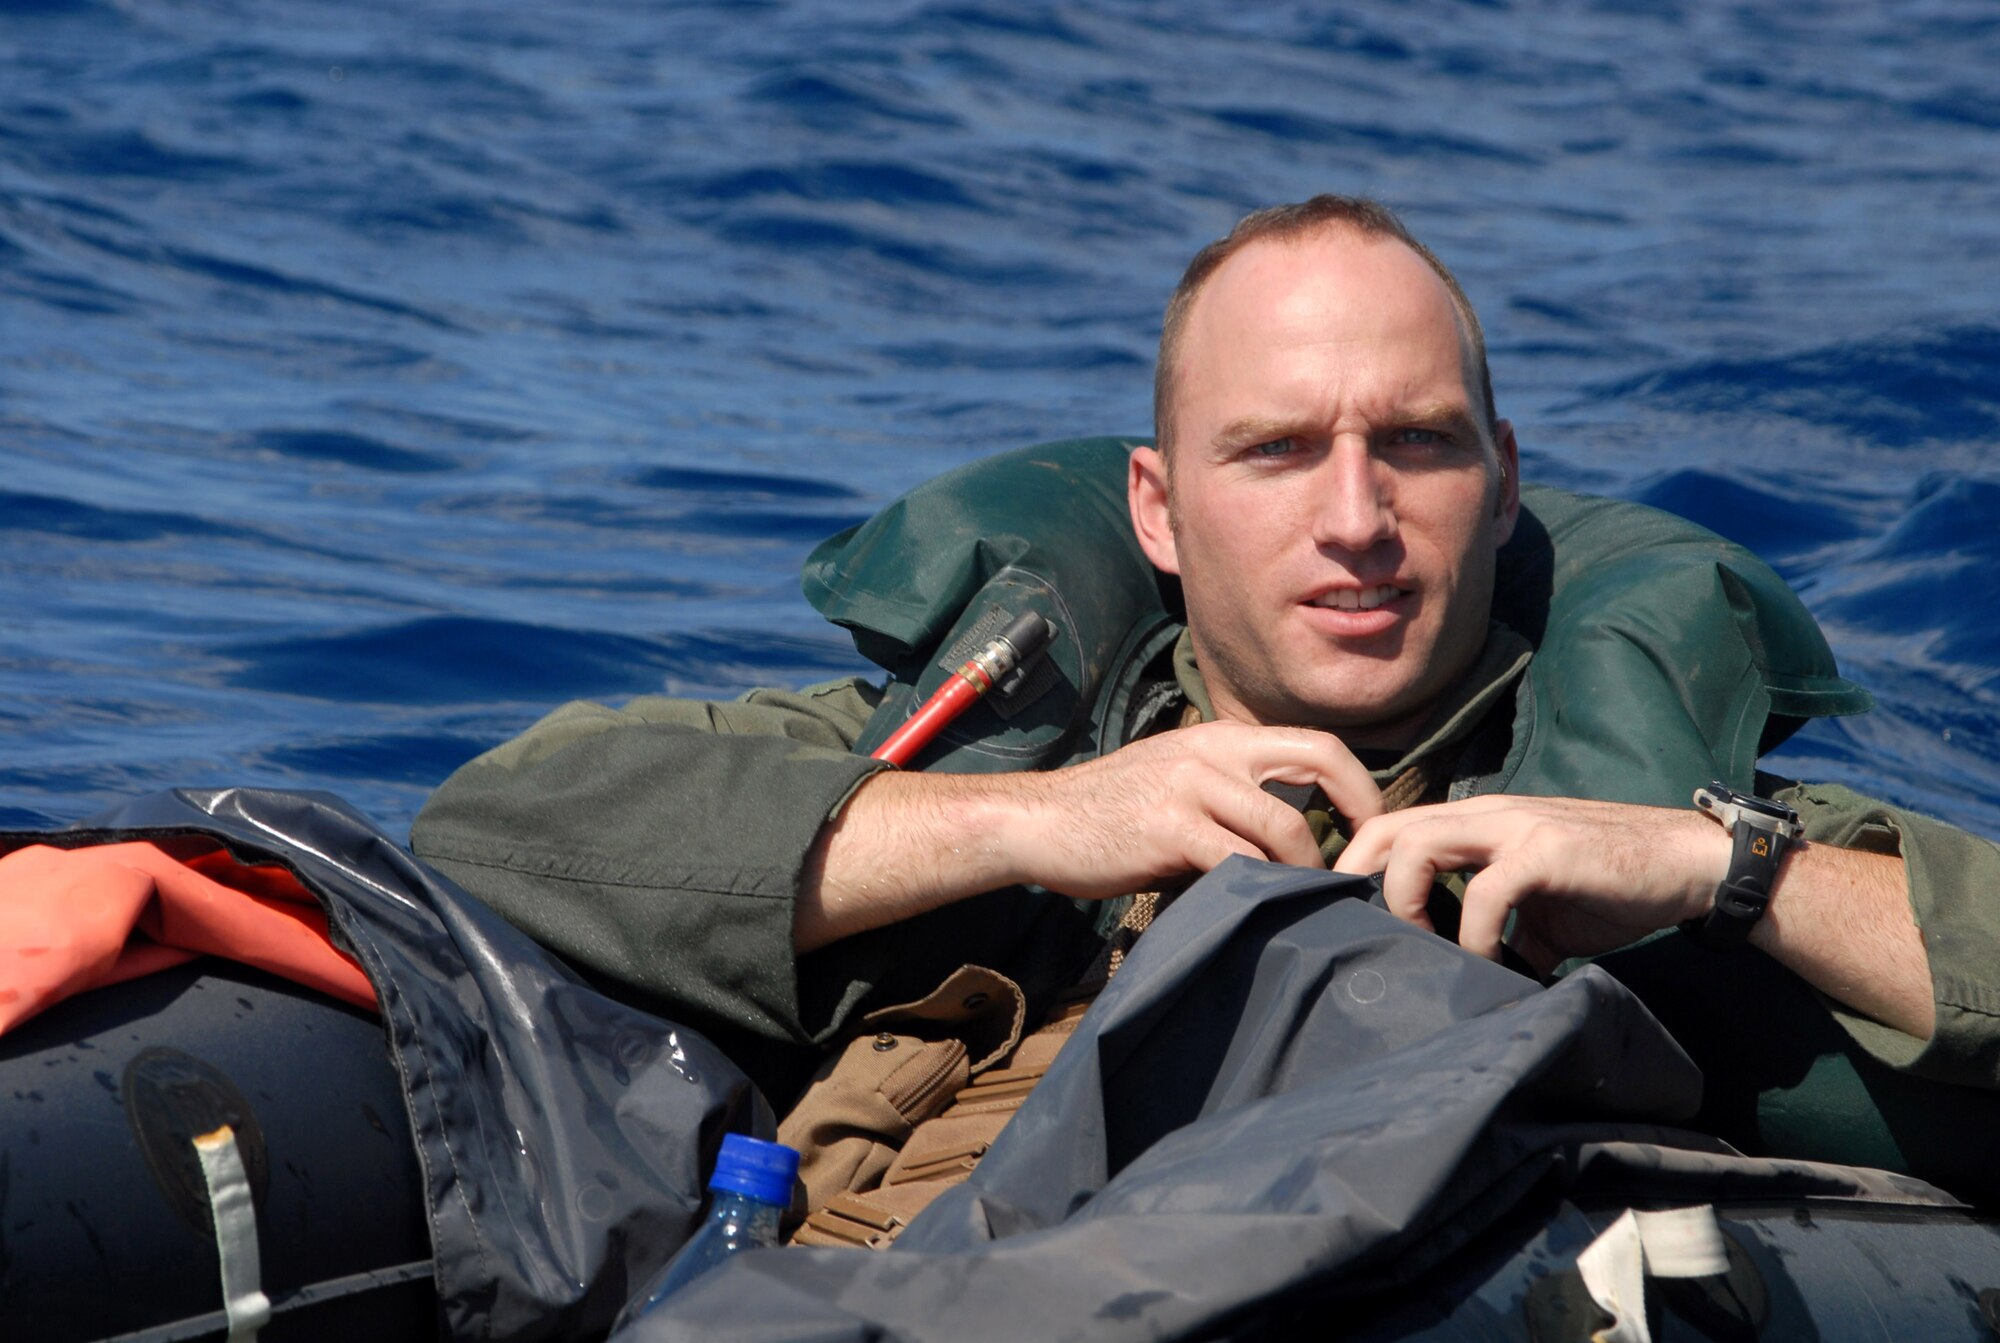 Capt. Derek Flynn waits for rescue in the waters off the coast of Okinawa, Japan, Oct. 24 during local operational readiness exercise Beverly High 08-1. Captain Flynn was placed in the water as part of a survival, evasion, resistance and escape training held by Kadena Air Base members. Captain Flynn is with the 67th Fighter Squadron. (U.S. Air Force photo/Staff Sgt. Christopher Marasky) 